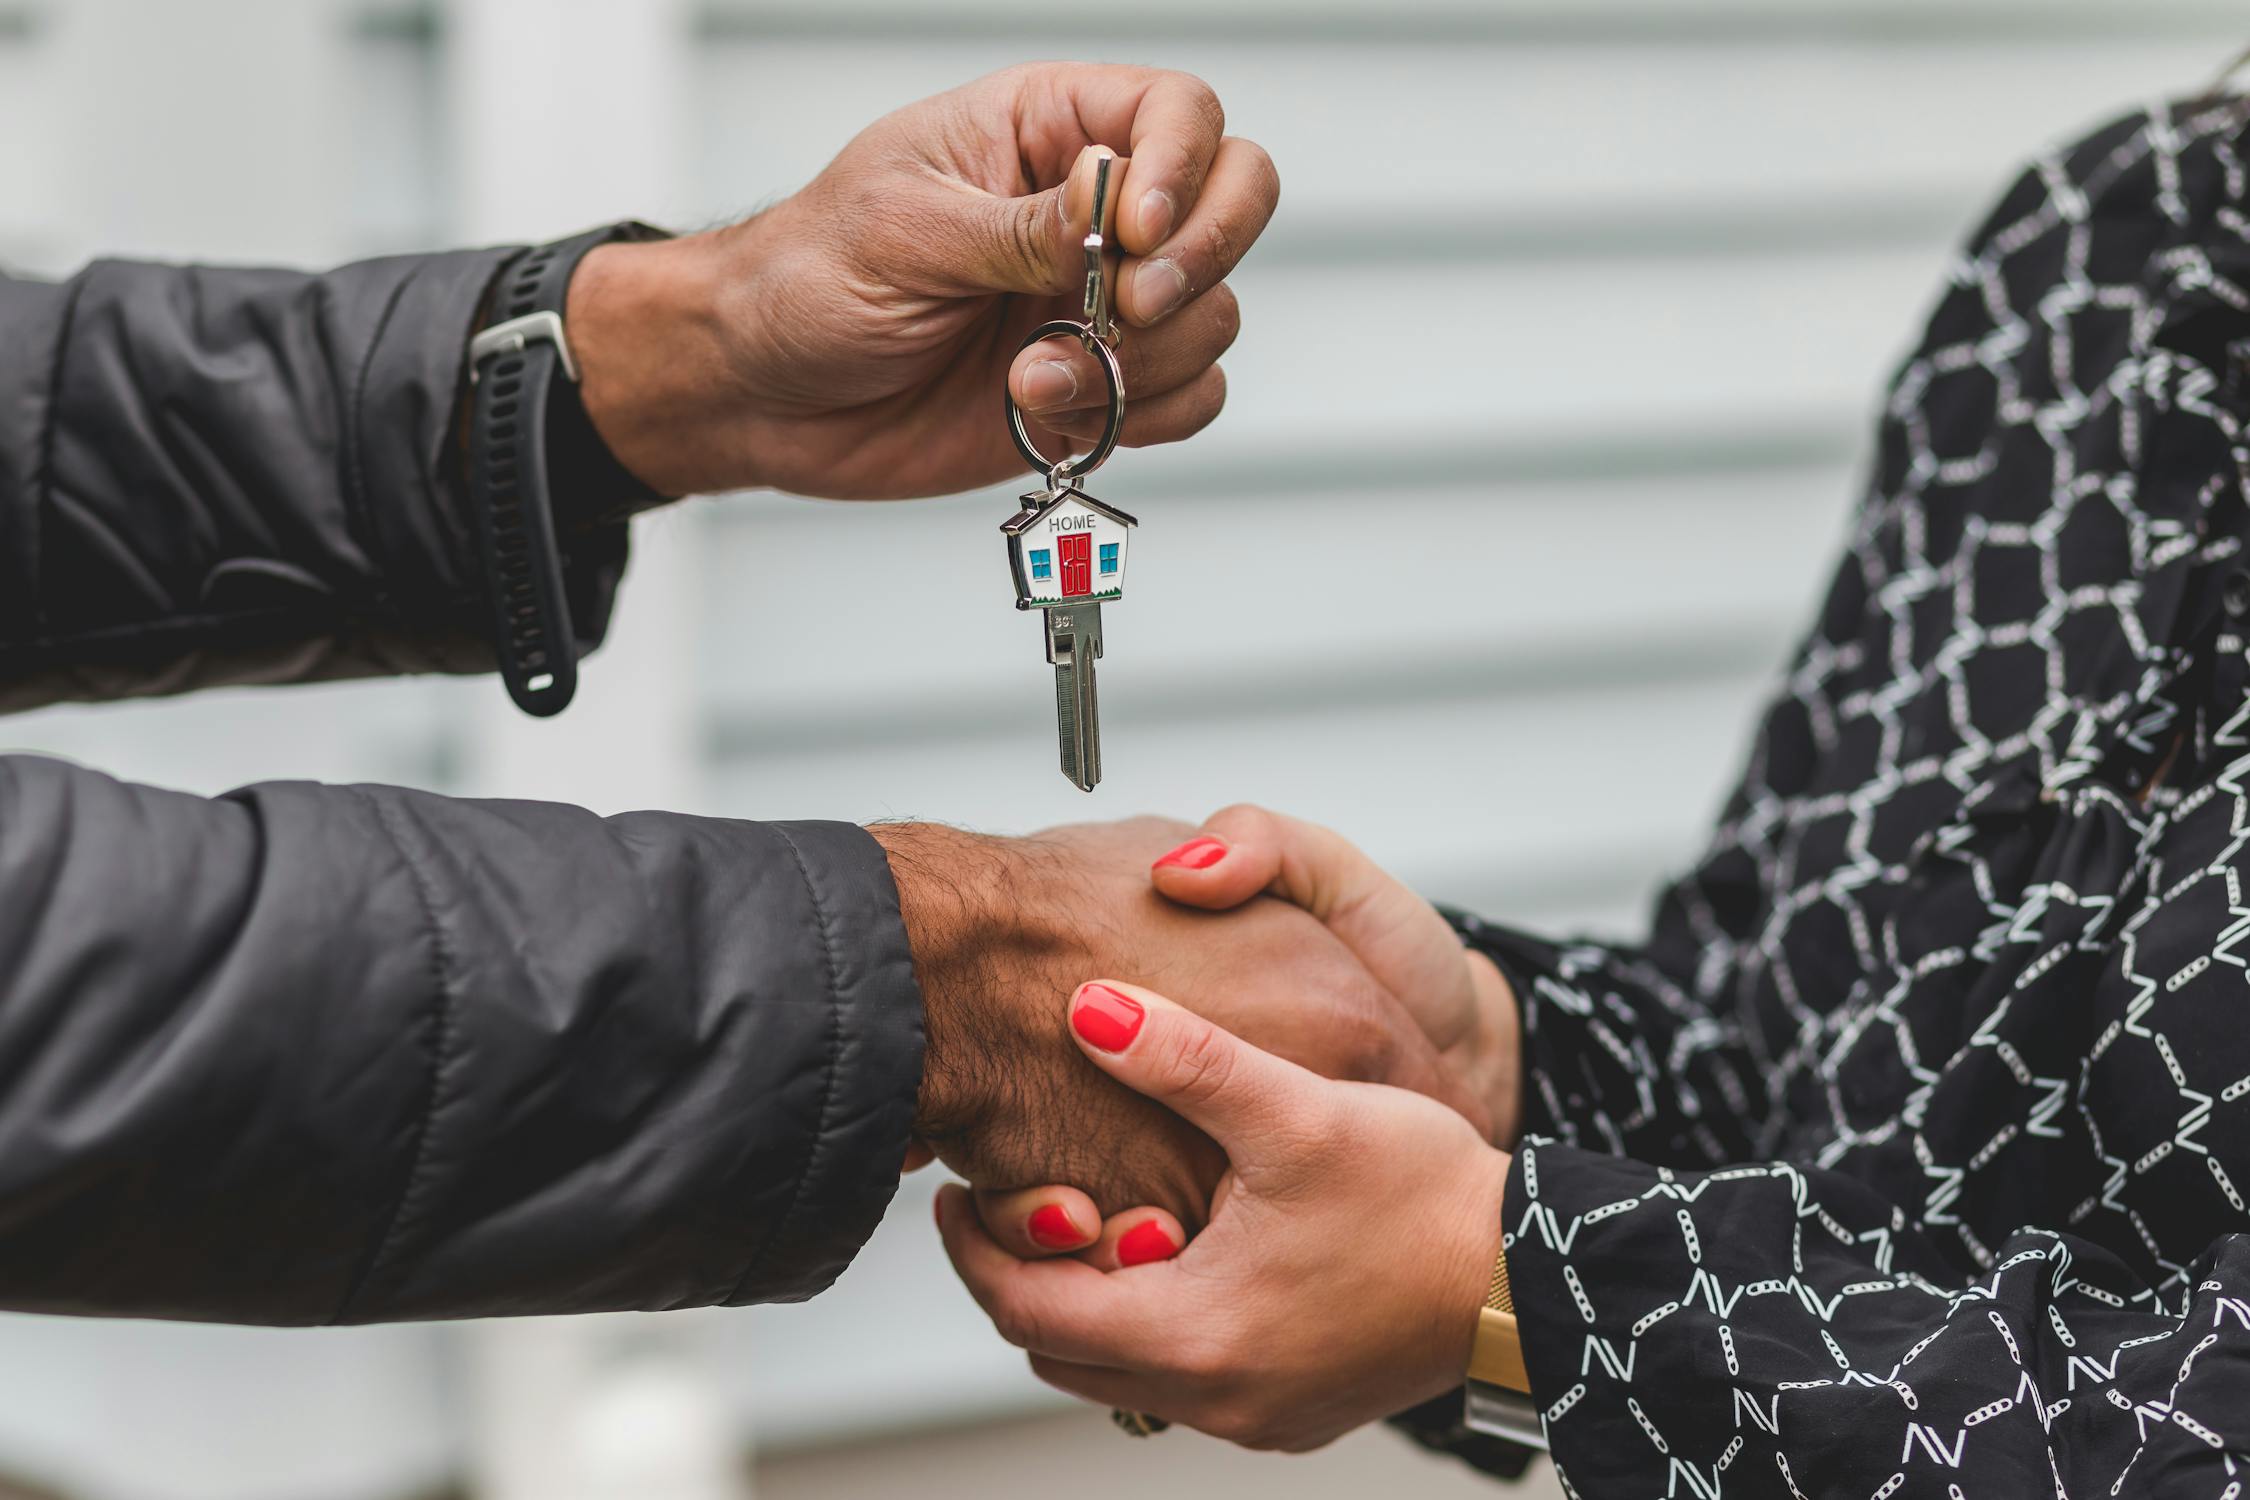 A person handing over a house key